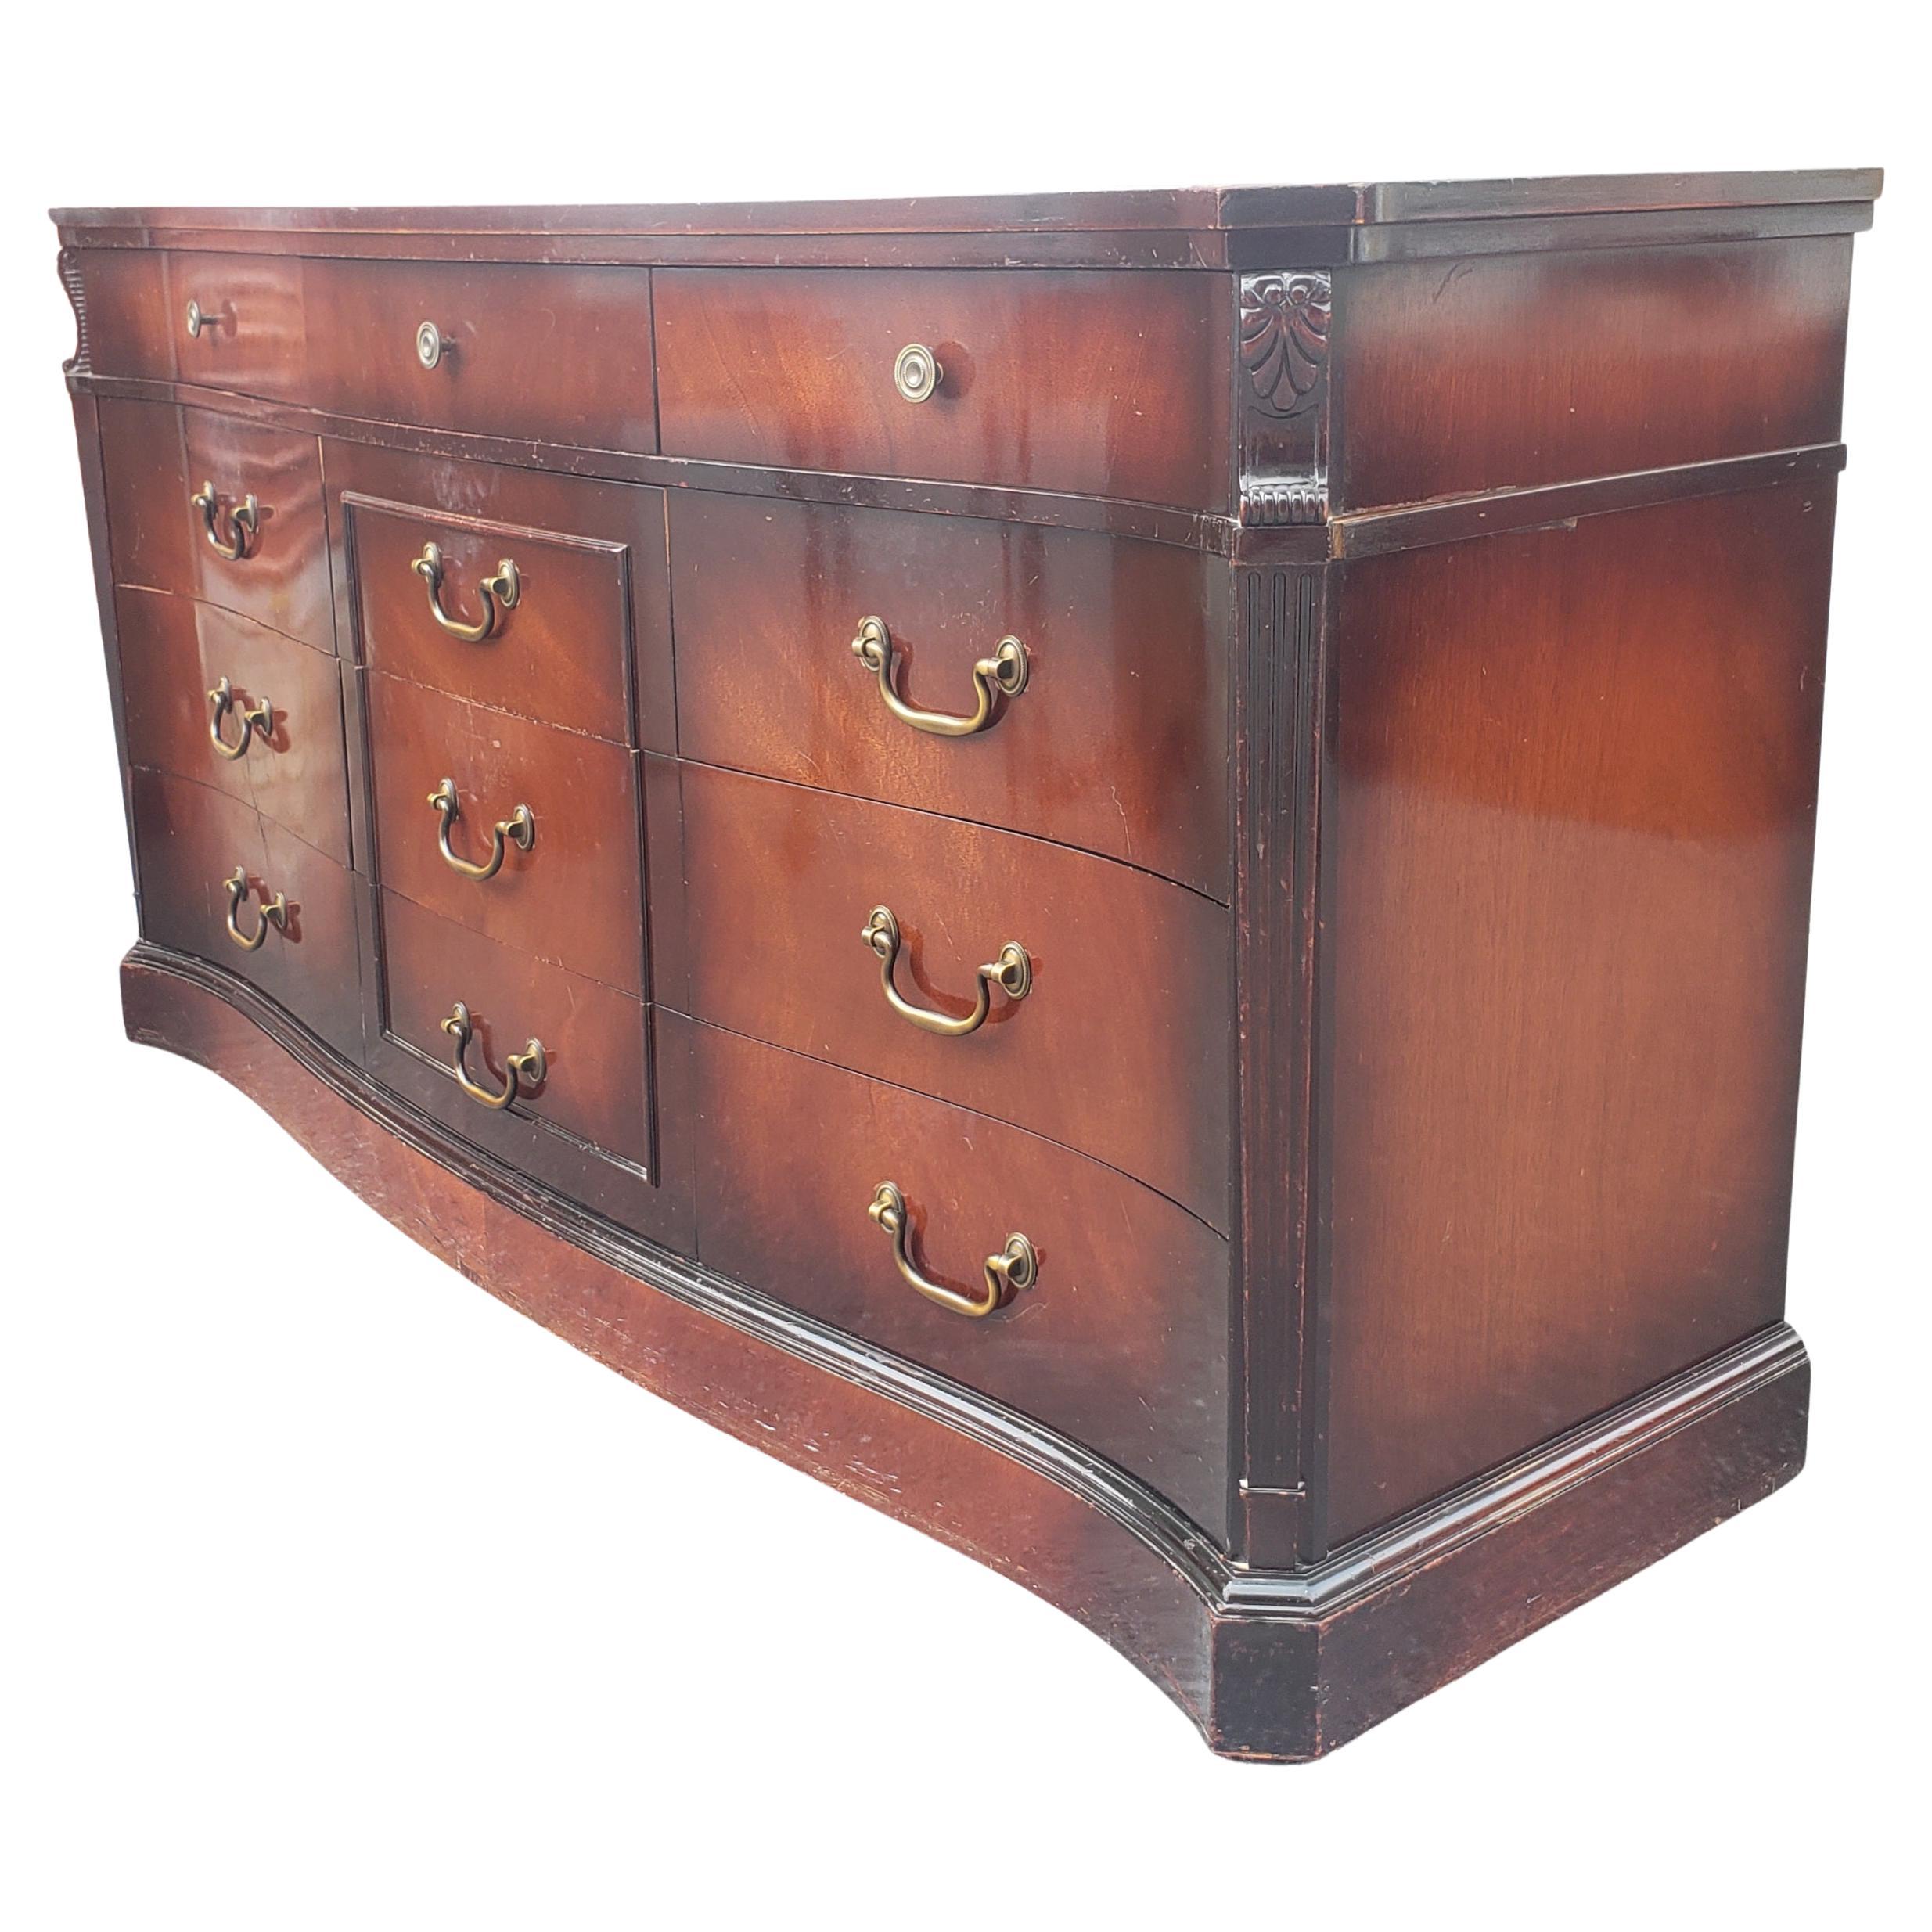 Rare 1940s Carlton house mahogany 12-drawer triple dresser. Solid red mahogany outer with fruitwood drawers. All dovetail drawers fully functional. Part of a set with the chest on chest dresser and 2 nightstands. Original finish.